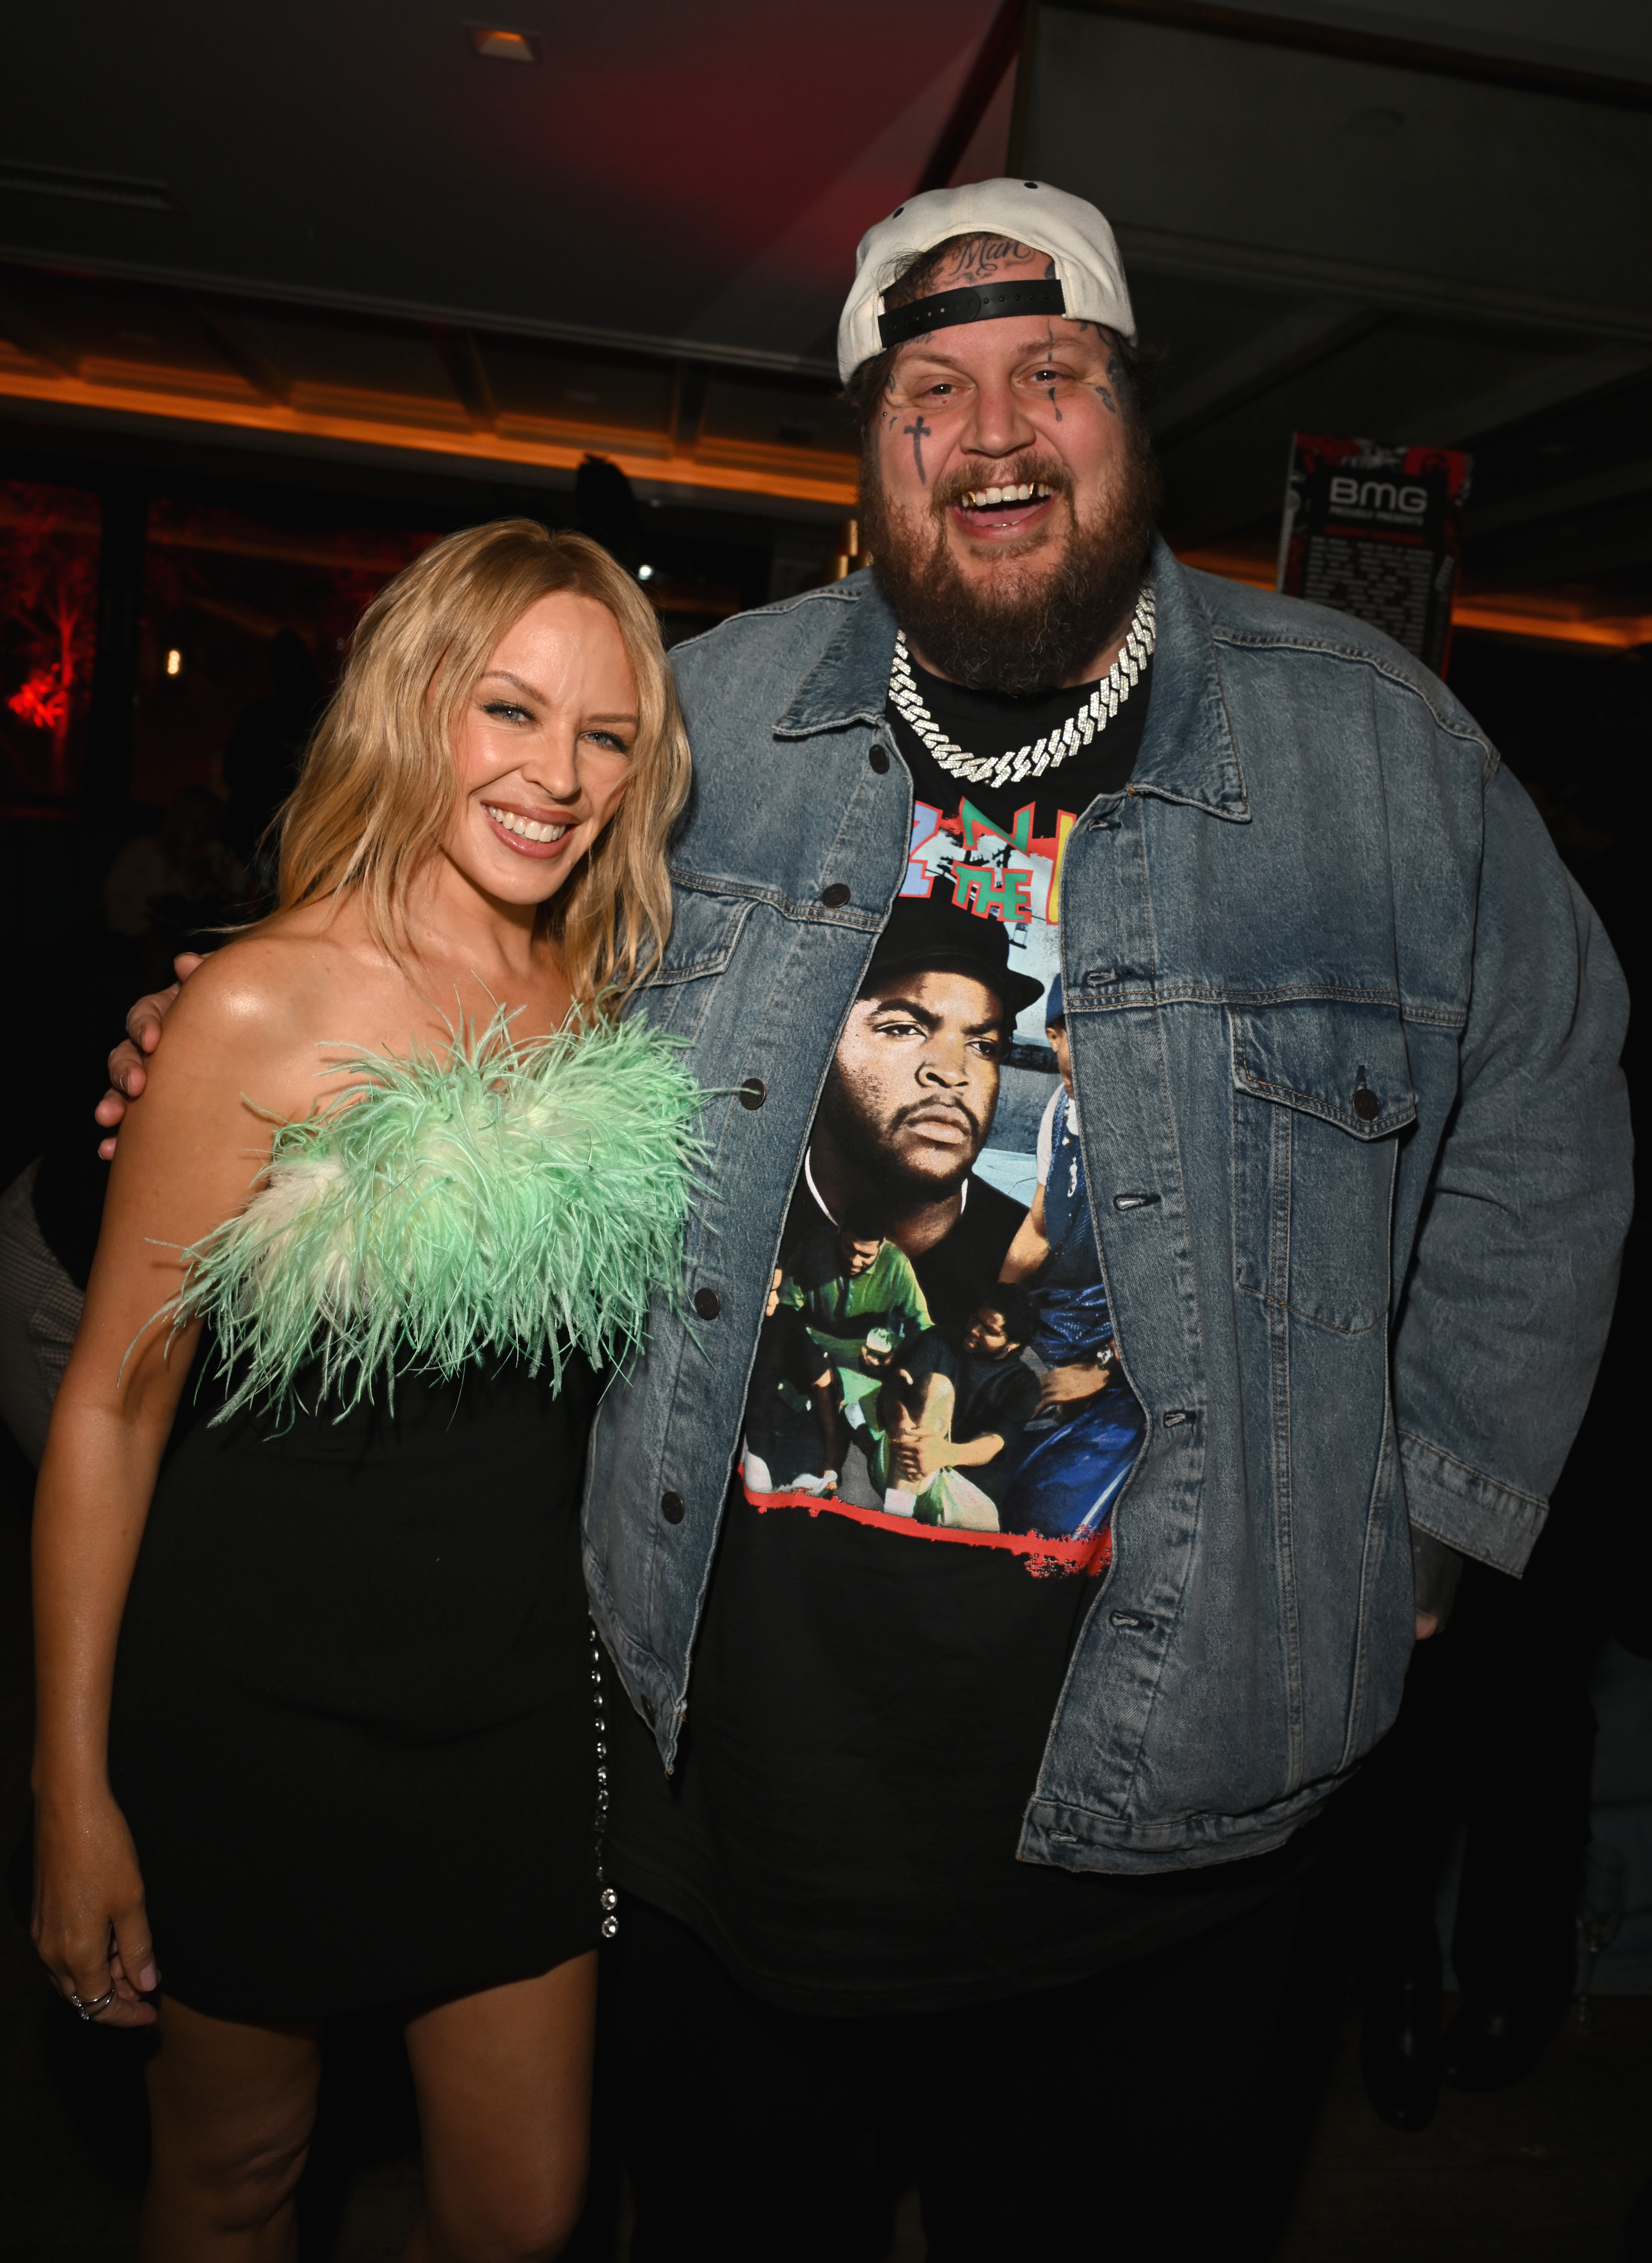 Kylie posed with American singer and rapper Jelly Roll